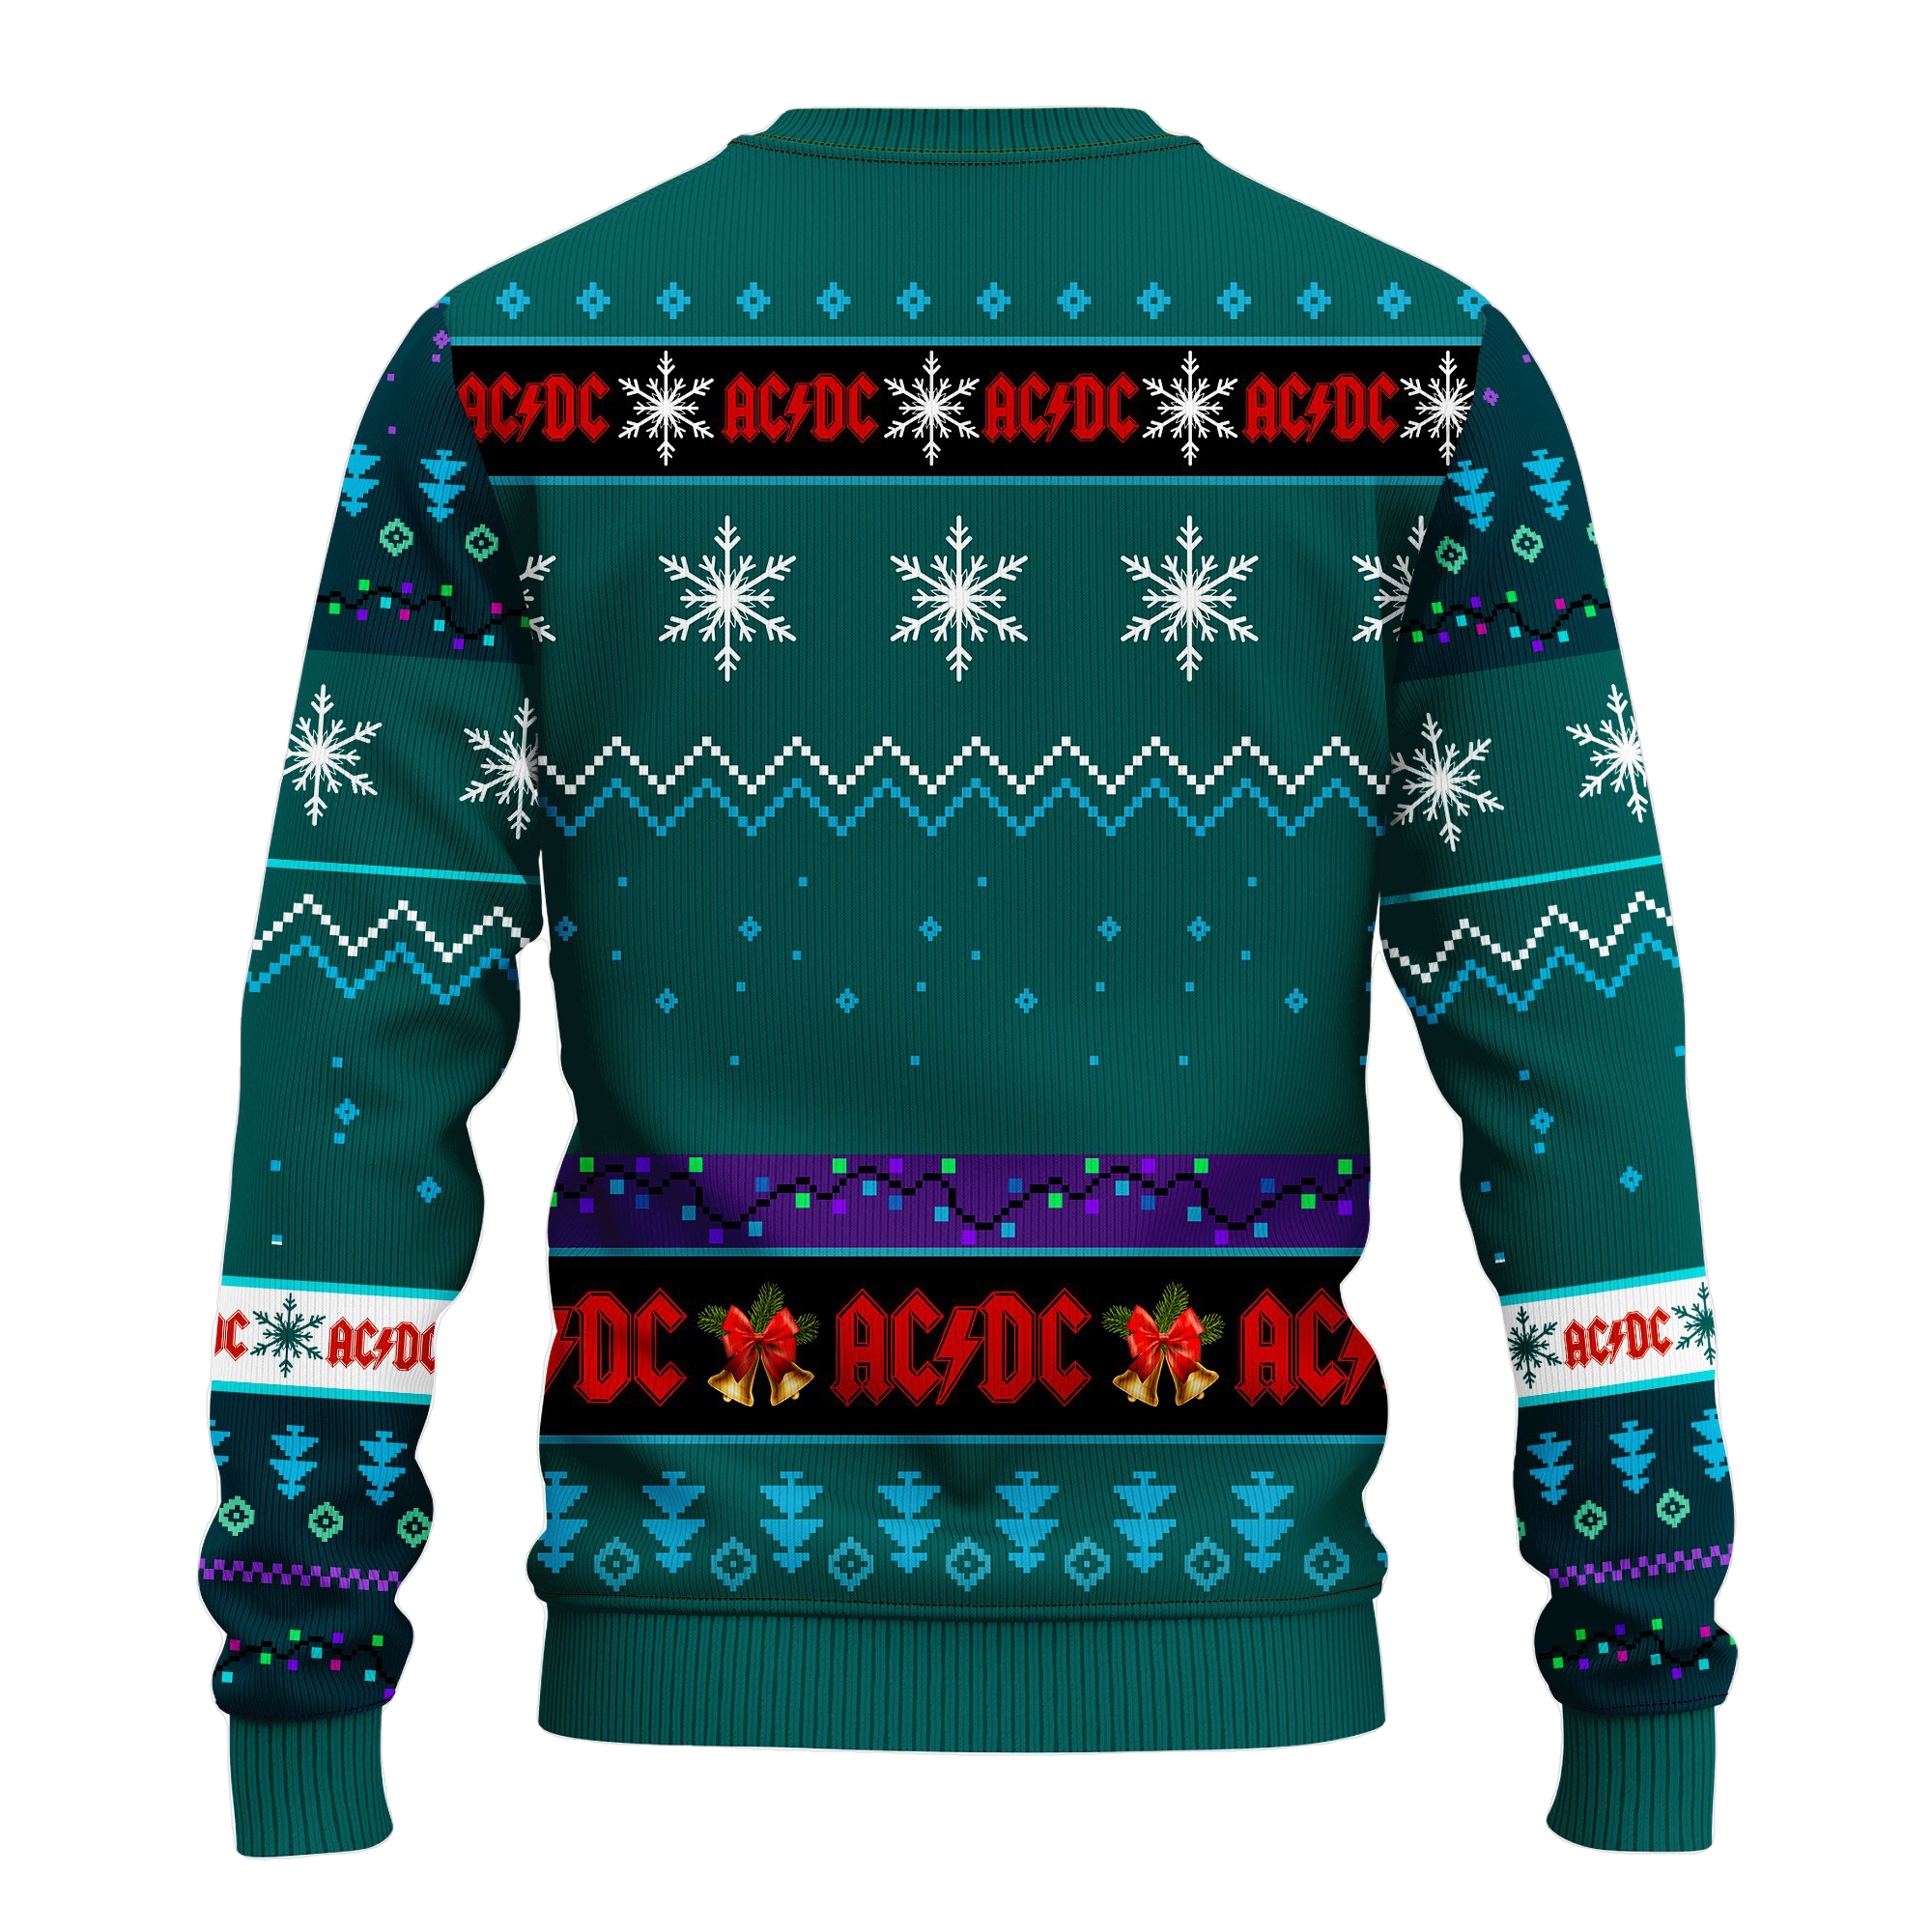 Acdc Ugly Christmas Sweater Blue Green Amazing Gift Idea Thanksgiving Gift